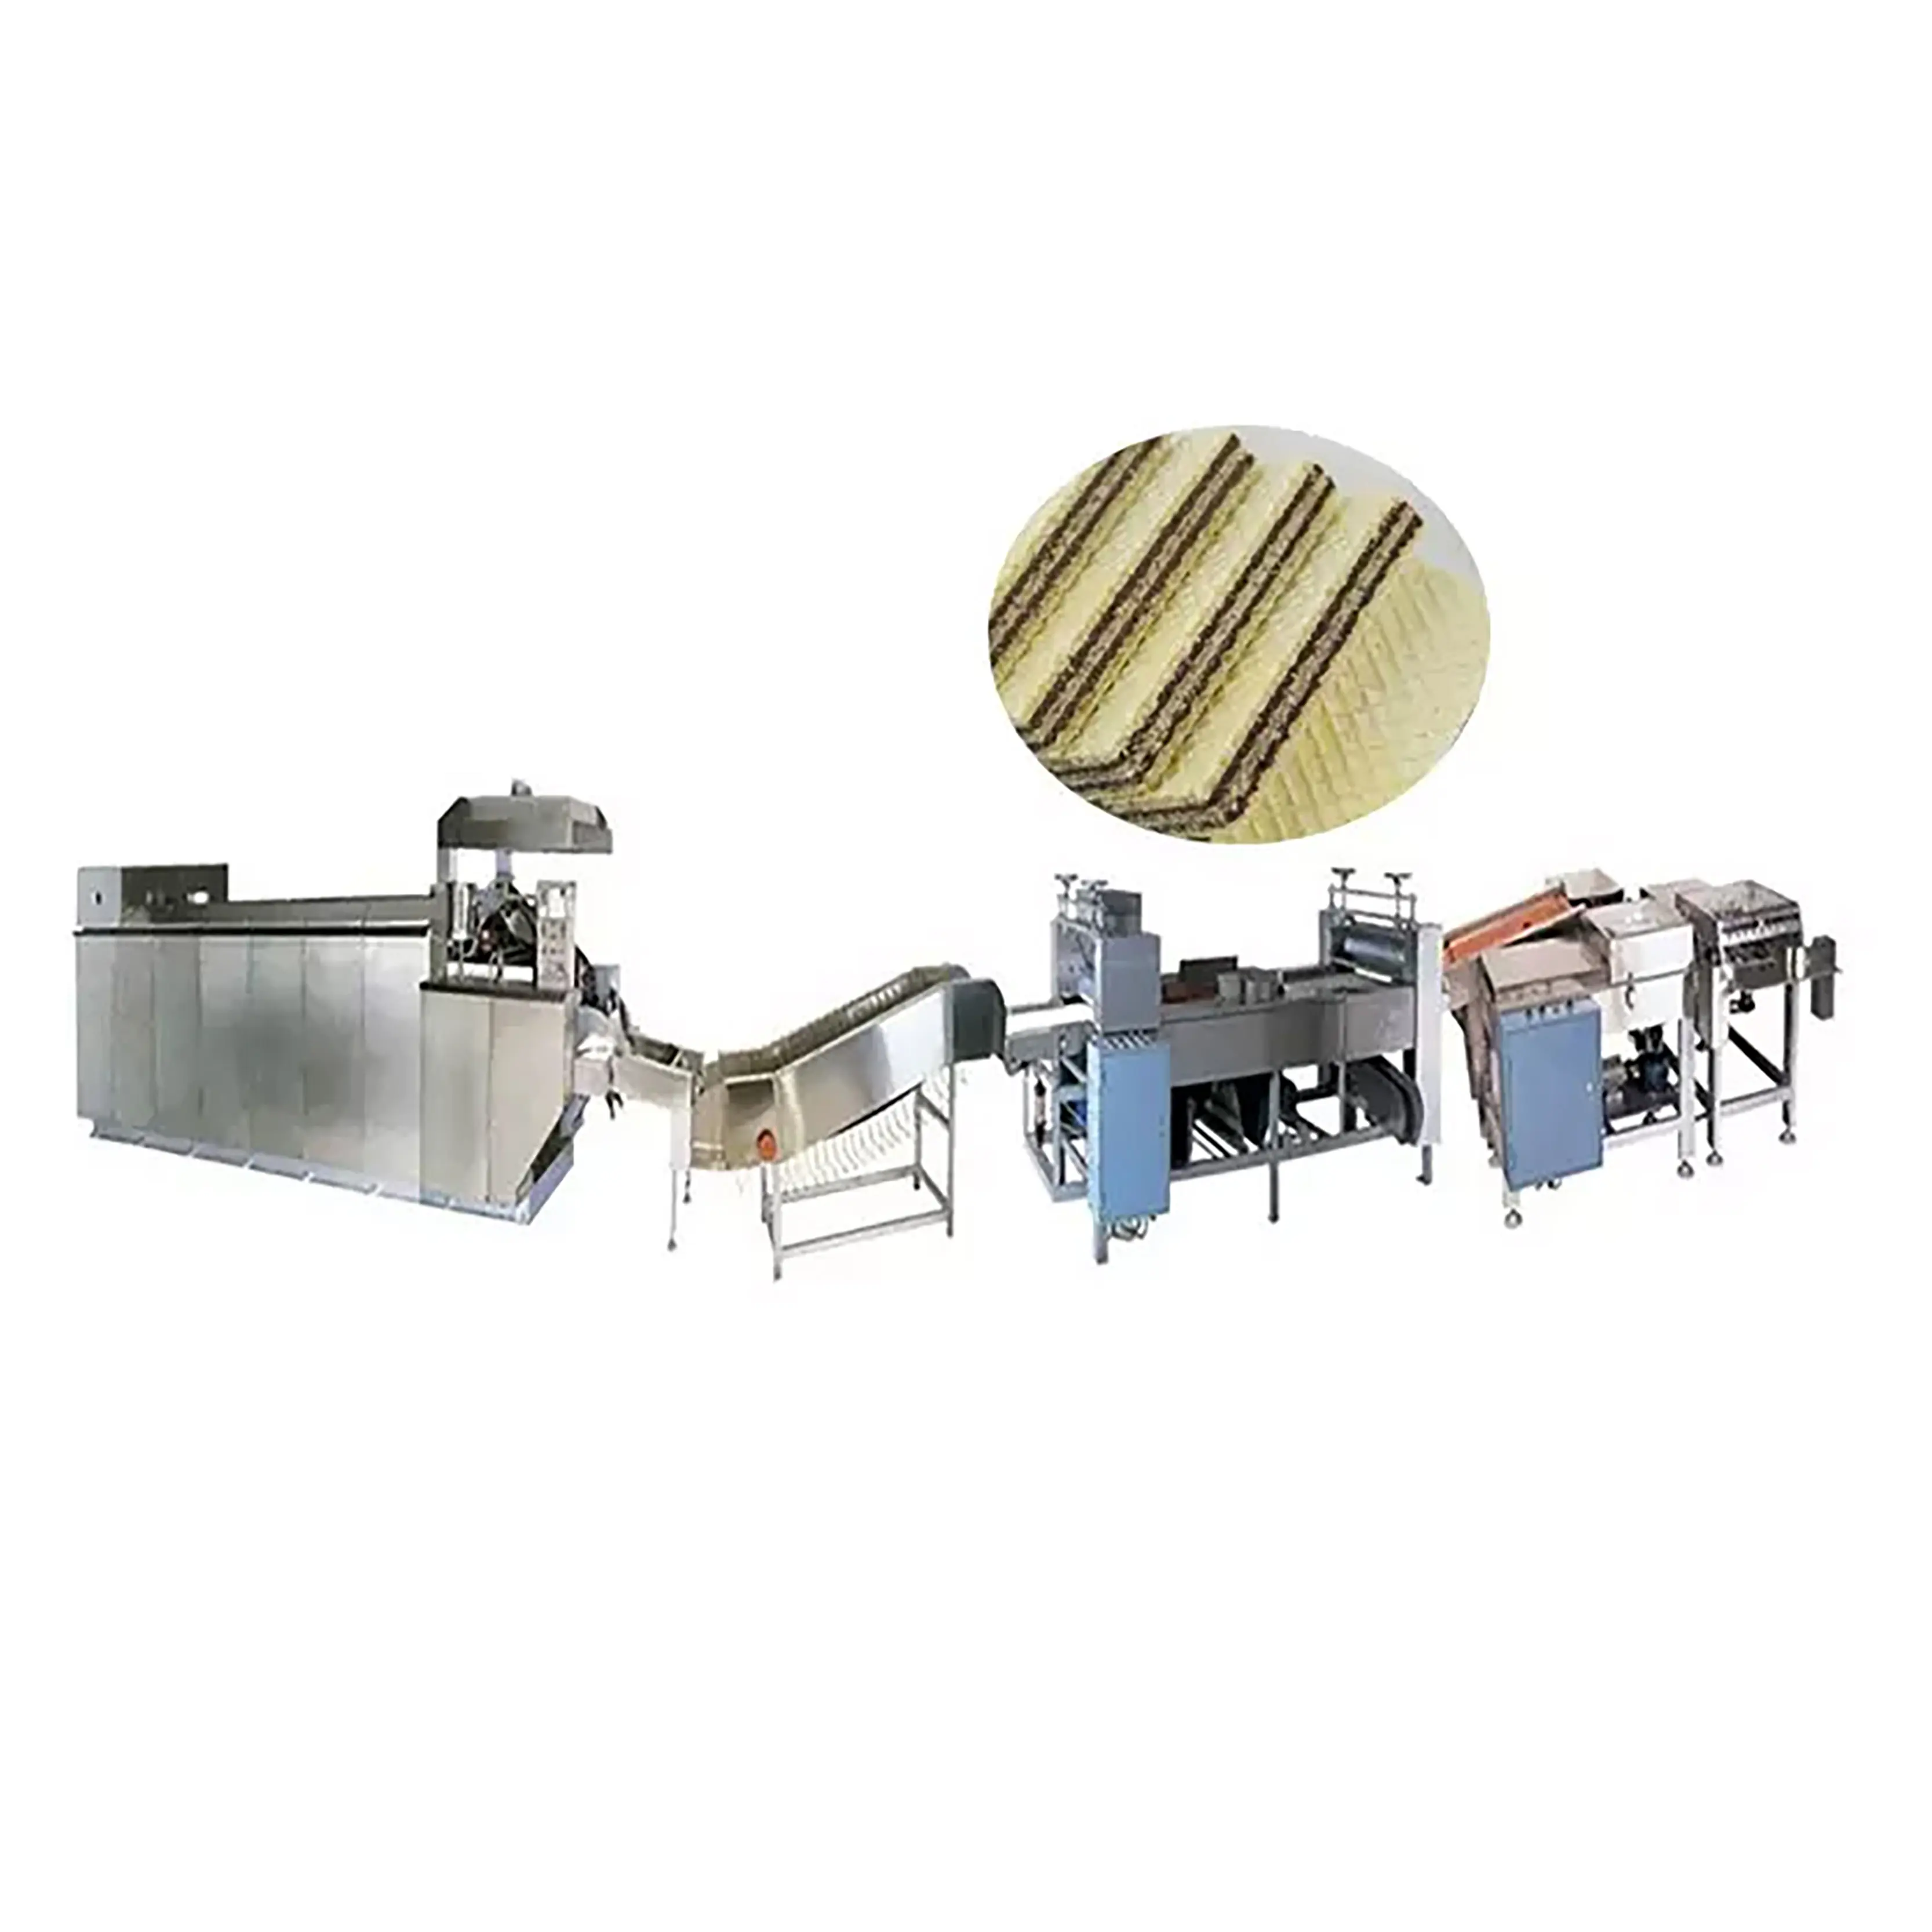 Cookie make machine product line small scale wafer biscuit make machine ice cream cone wafer biscuit making machine